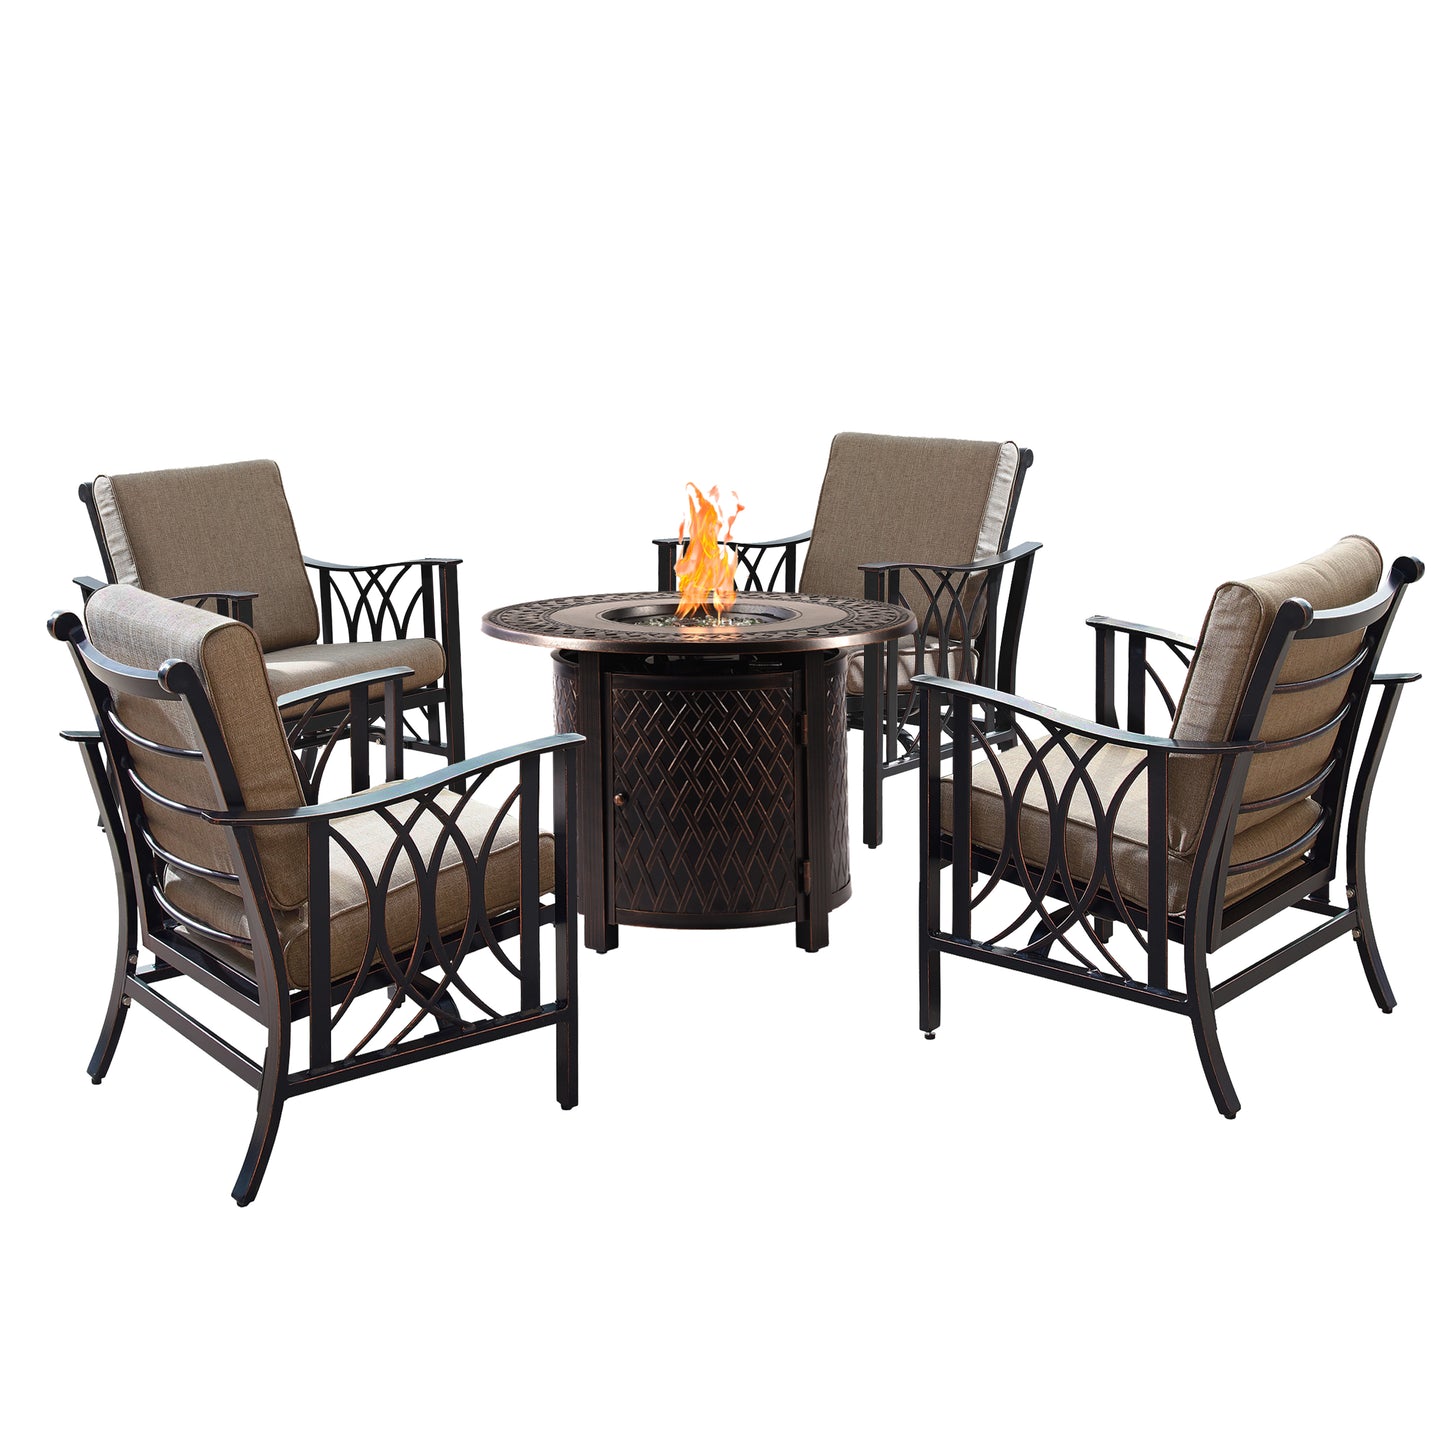 Aluminum 34-in Round Antique Copper Fire Table Set with Rocking Chairs